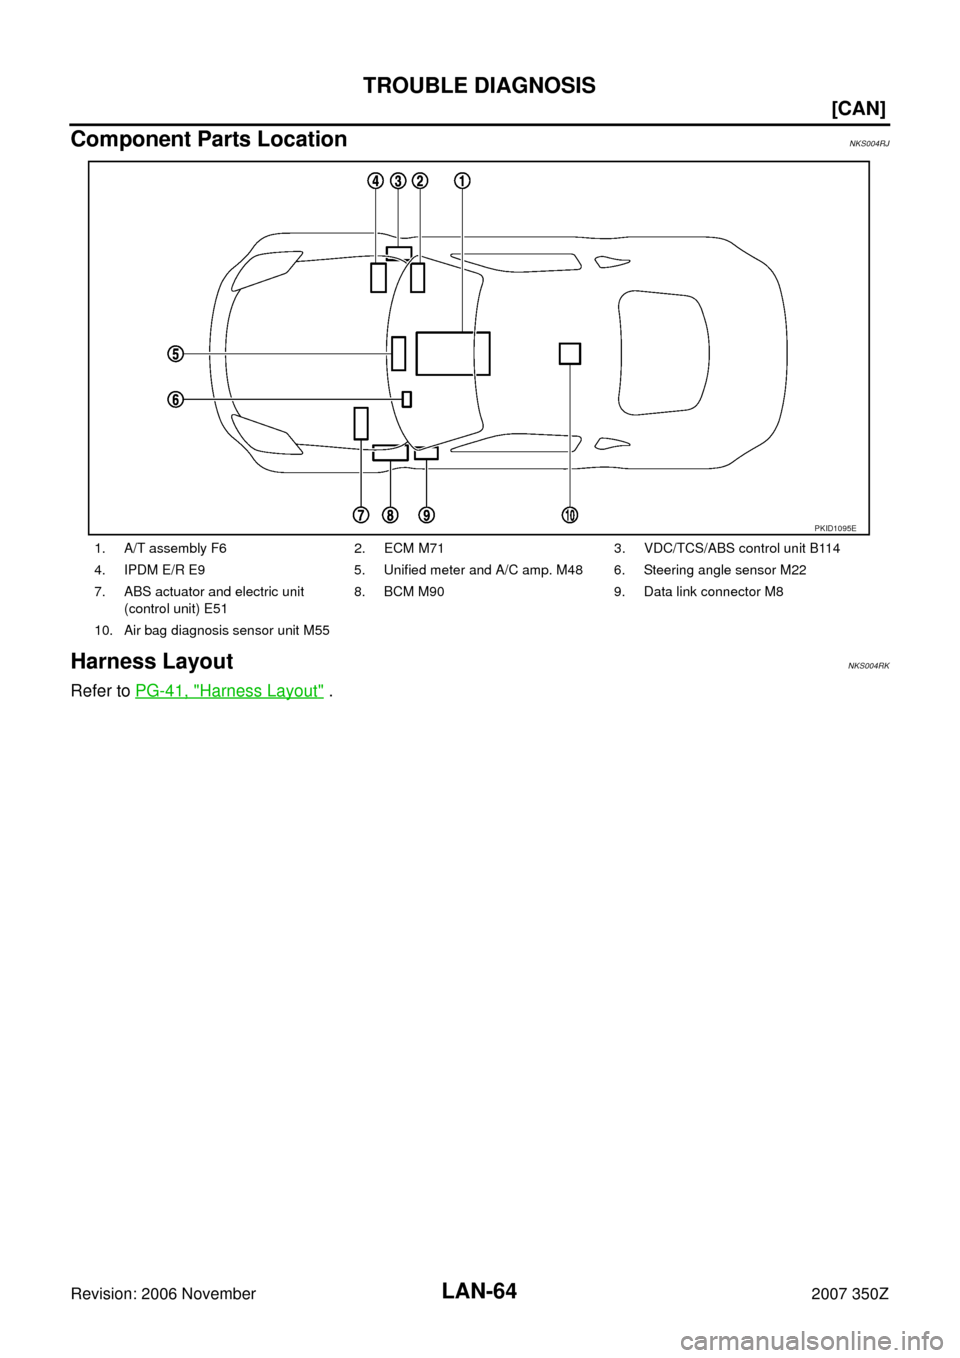 NISSAN 350Z 2007 Z33 LAN System Workshop Manual LAN-64
[CAN]
TROUBLE DIAGNOSIS
Revision: 2006 November2007 350Z
Component Parts LocationNKS004RJ
Harness LayoutNKS004RK
Refer to PG-41, "Harness Layout" .
1. A/T assembly F6 2. ECM M71 3. VDC/TCS/ABS 